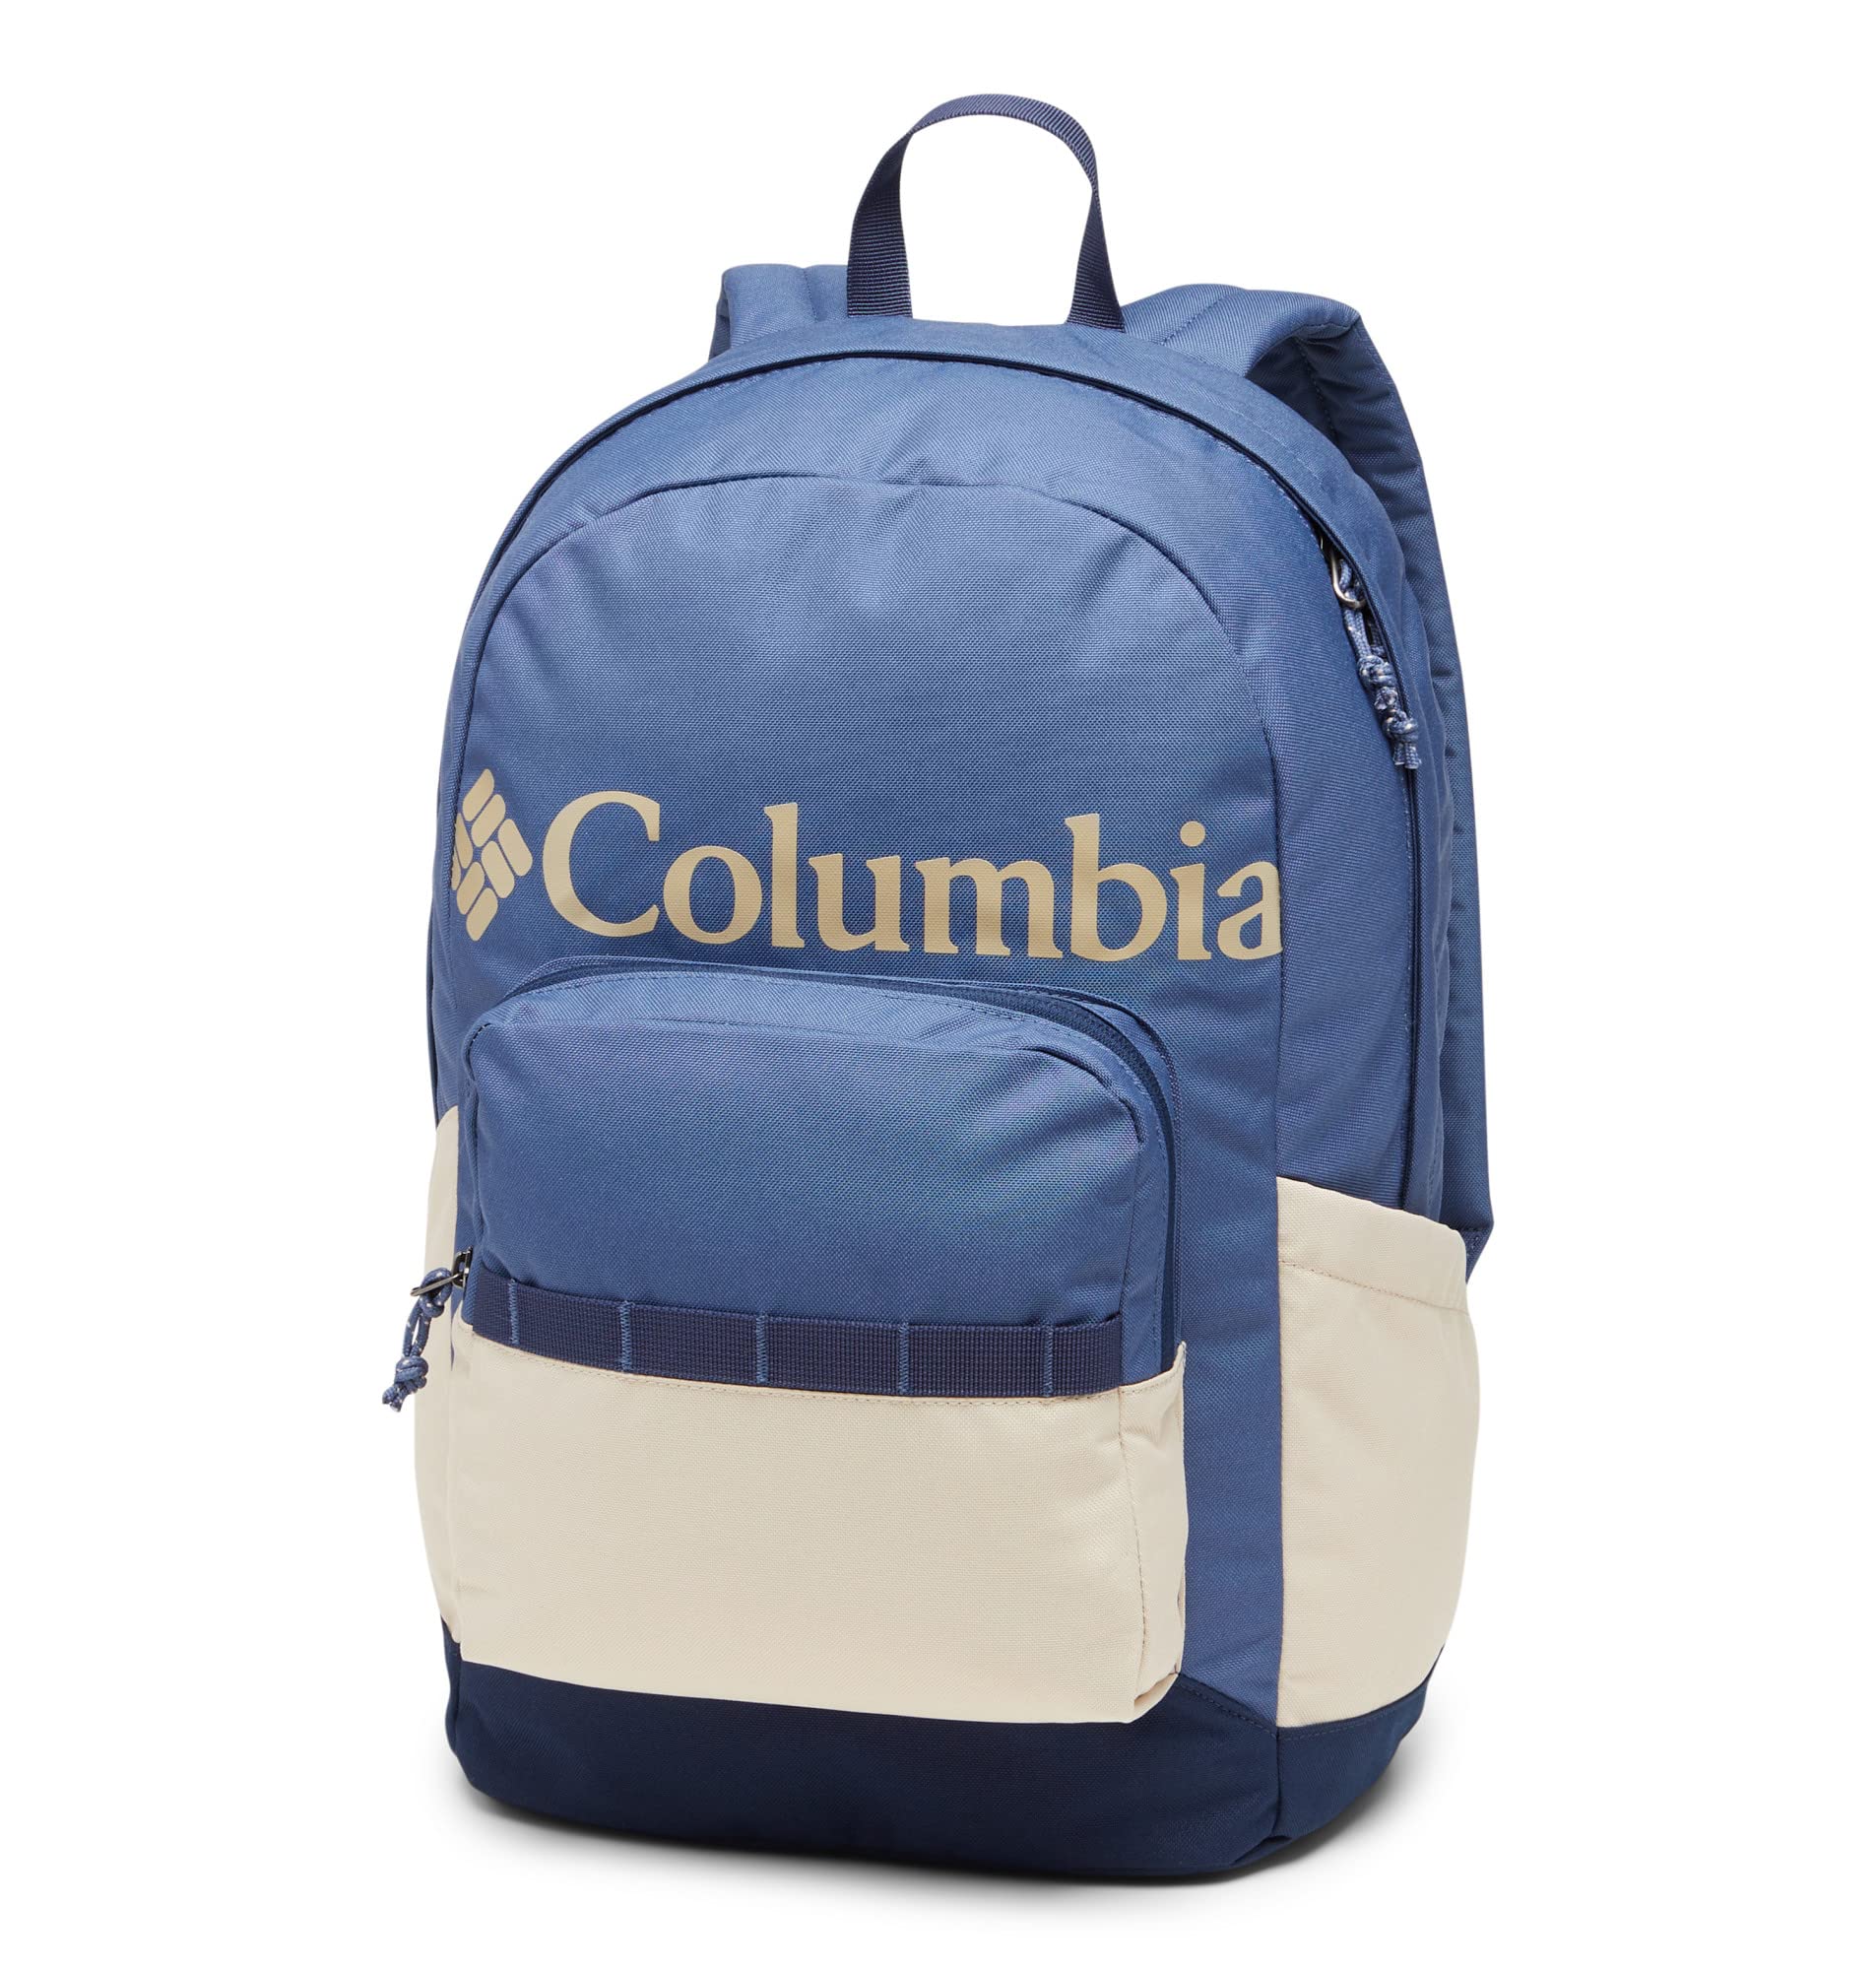 Columbia Unisex Zigzag 22L Backpack, Dark Mountain/Ancient Fossil, One Size